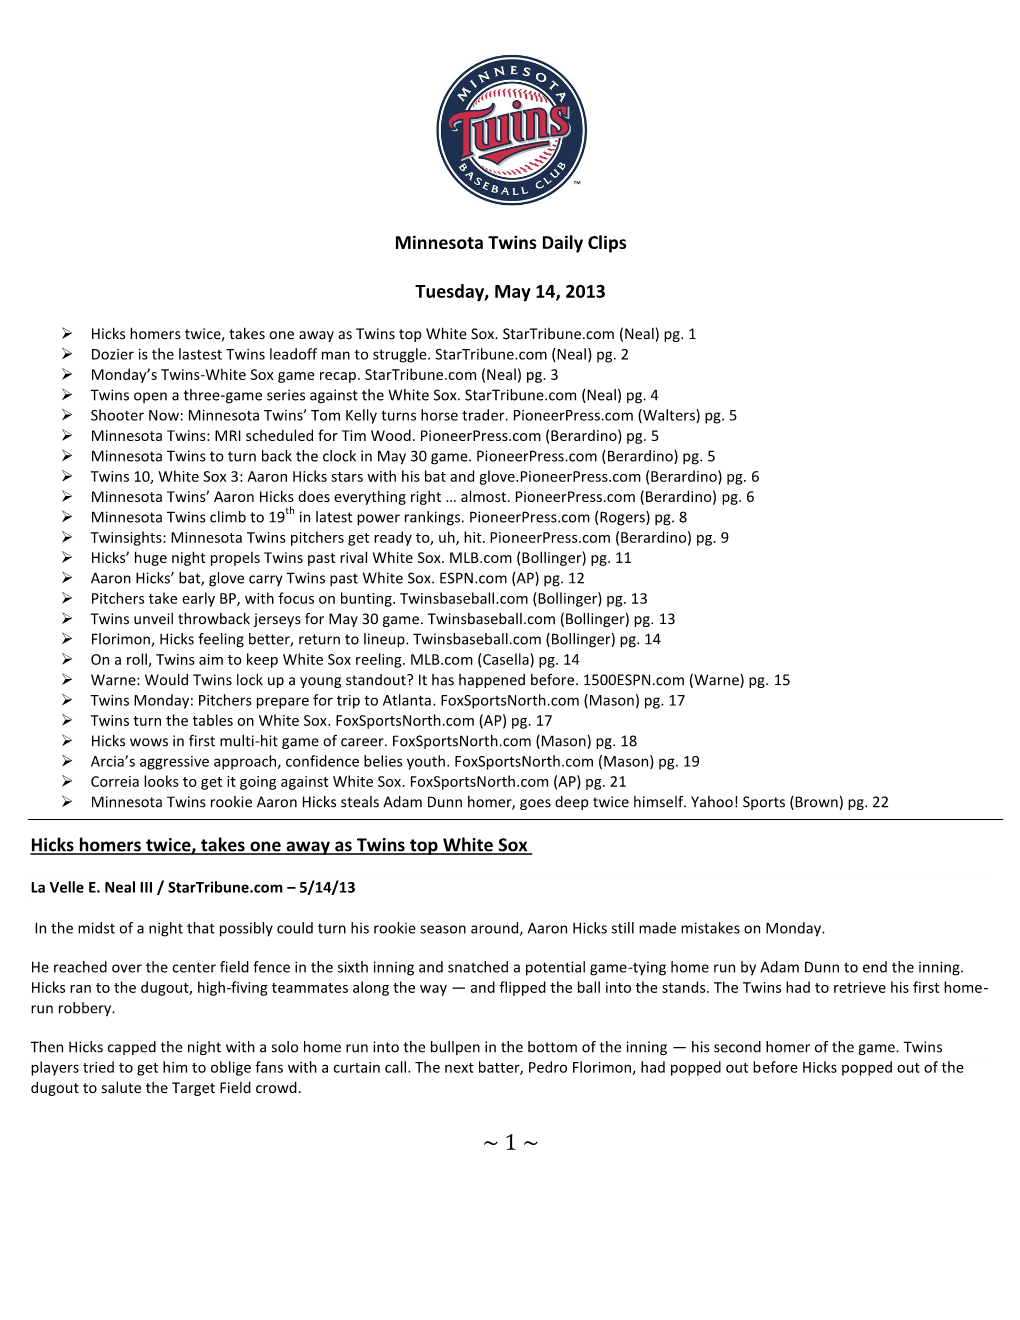 Minnesota Twins Daily Clips Tuesday, May 14, 2013